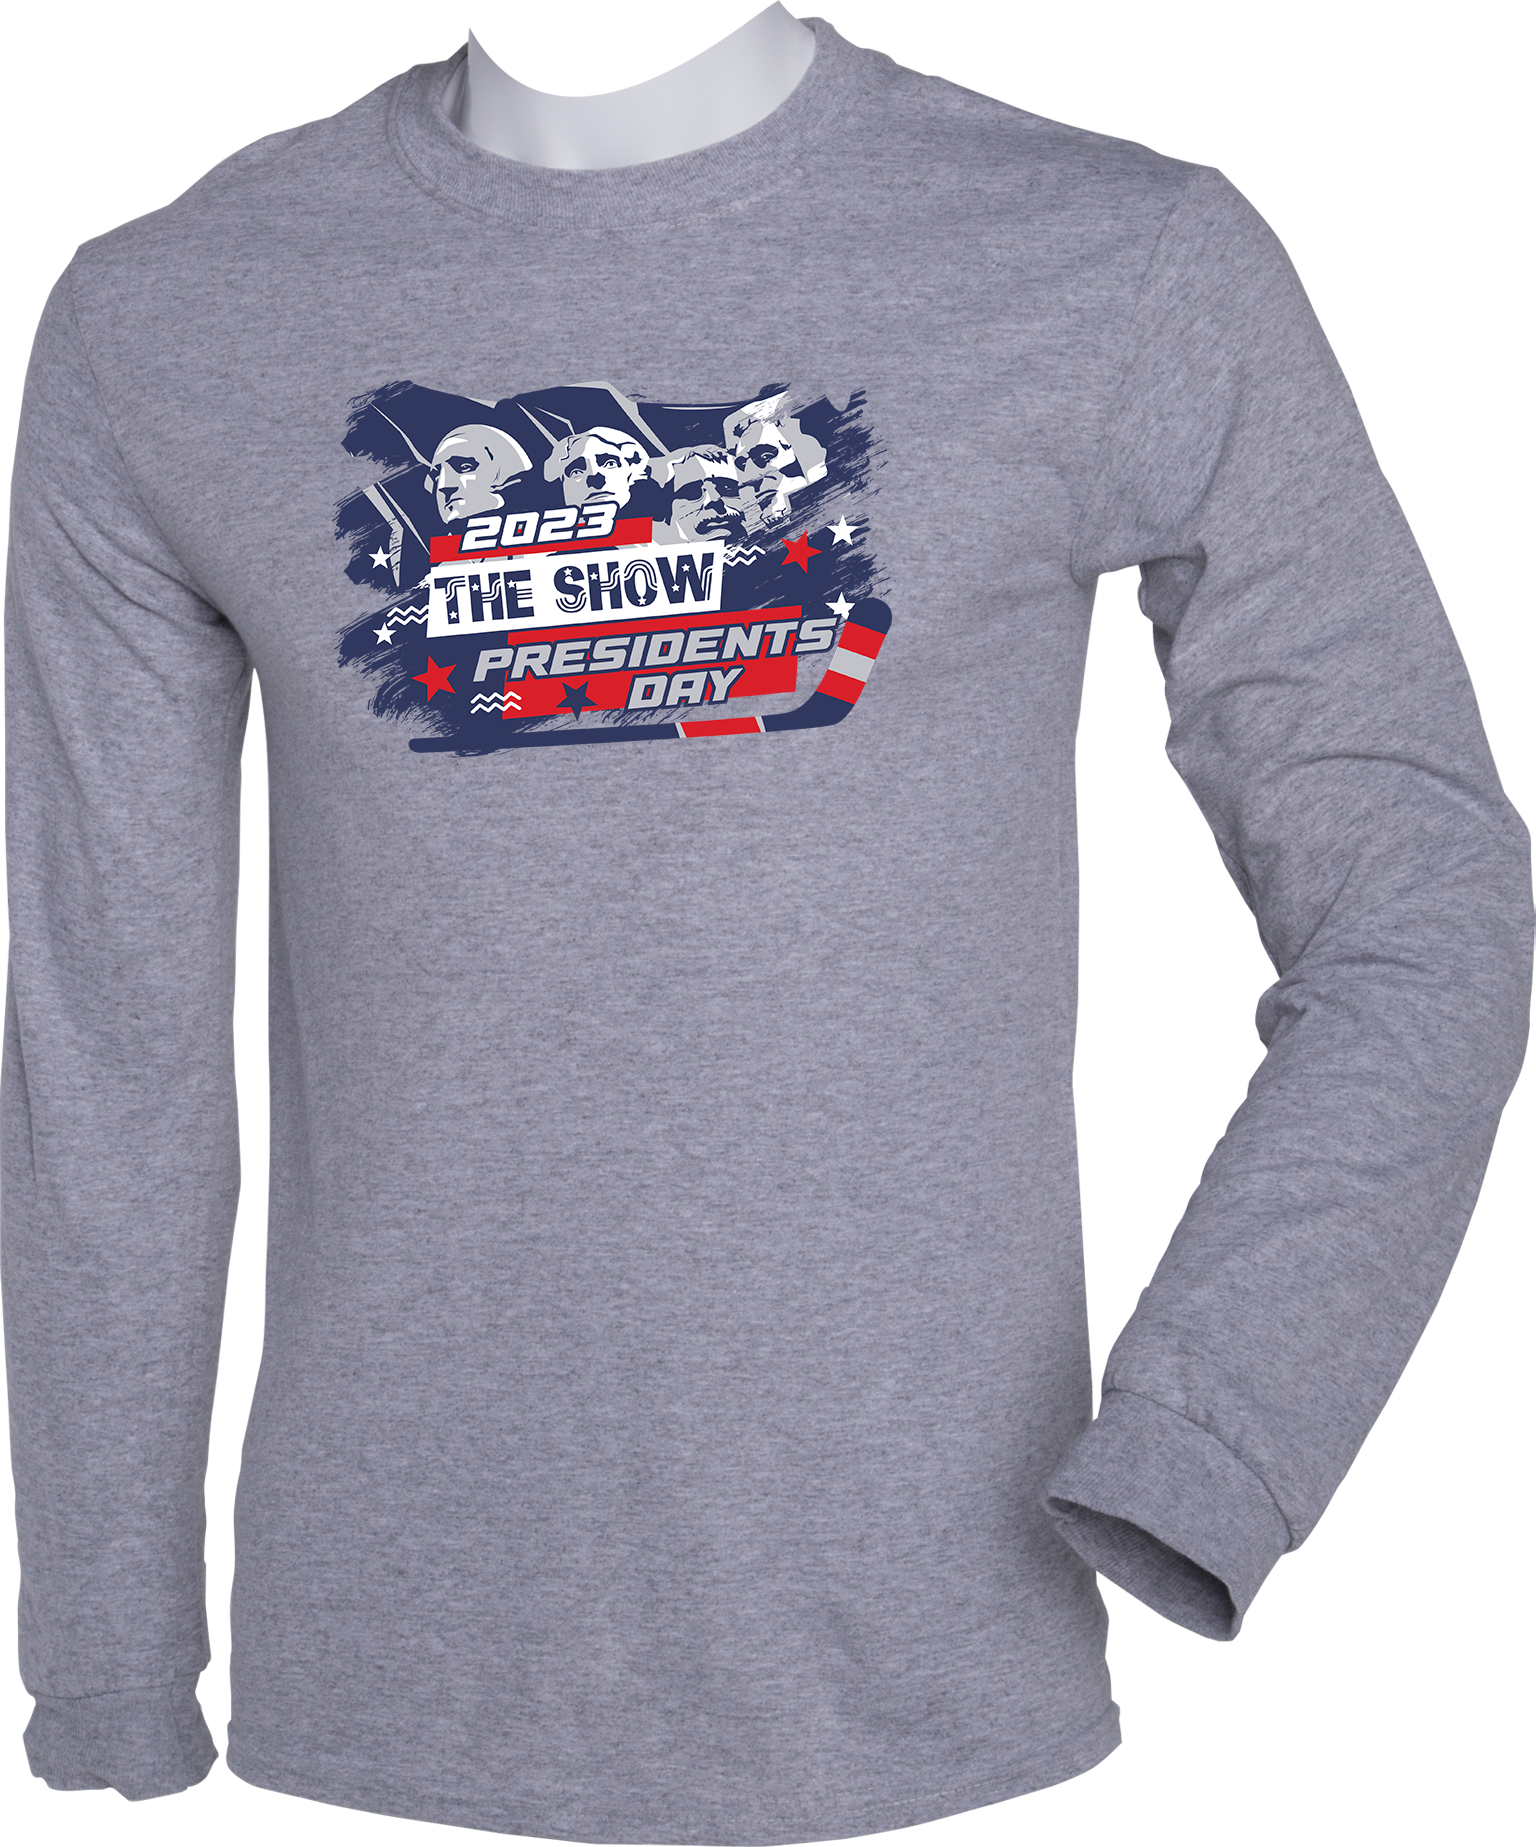 LONG SLEEVES - 2023 The Show President's Day